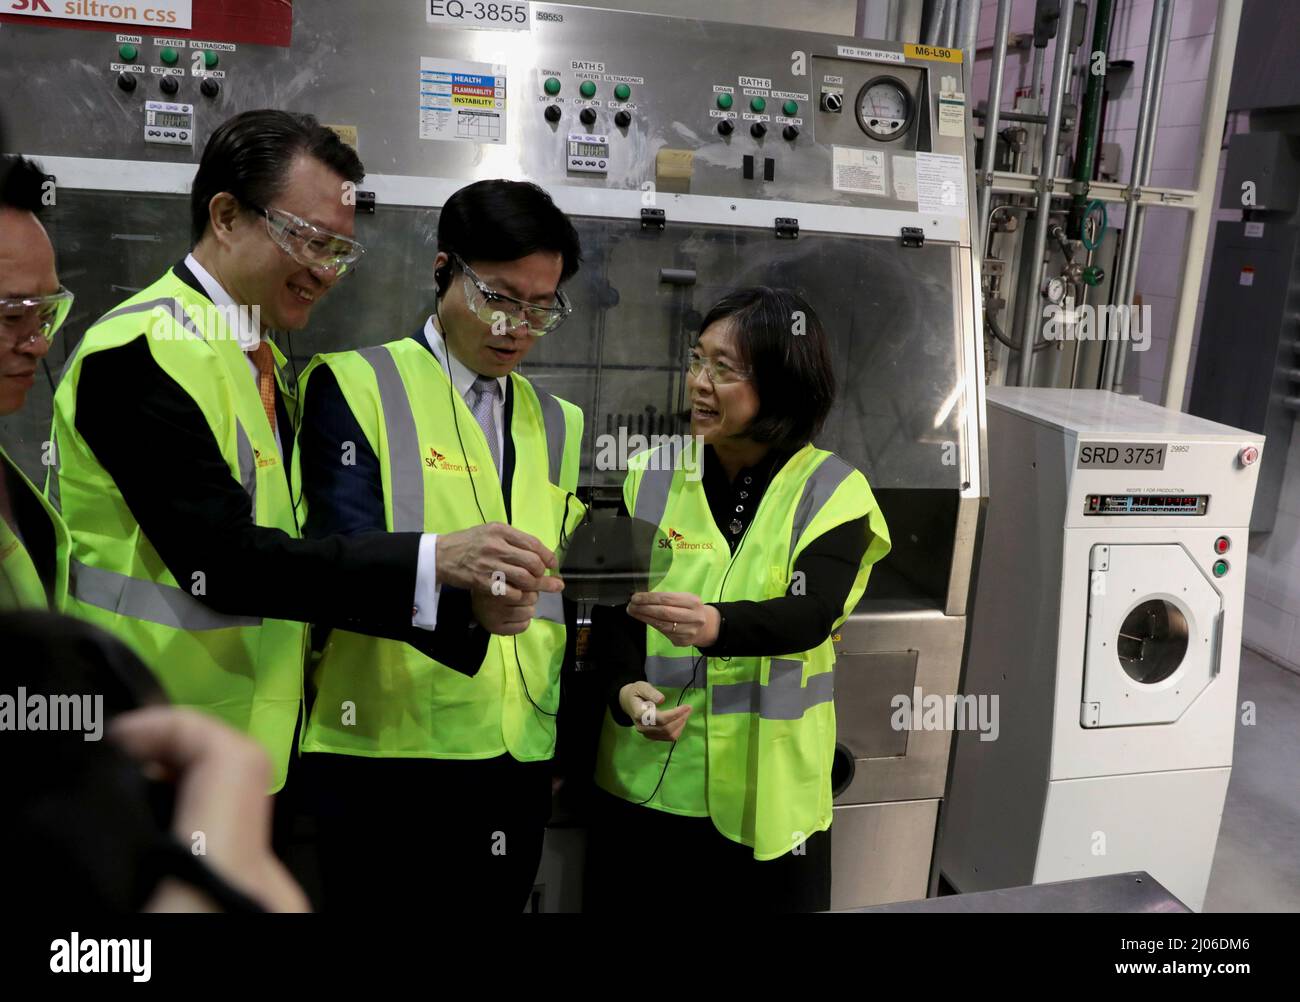 Ambassador Katherine Tai, U.S. Trade Representative, ROK Trade Minister Yeo Han-Koo, and Jeong Joon You, vice chairman SK Group tour a silicon wafer plant being expanded by South Korean semiconductor manufacturer SK Siltron CSS in Auburn, Michigan, U.S., March 16, 2022. REUTERS/Rebecca Cook Stock Photo